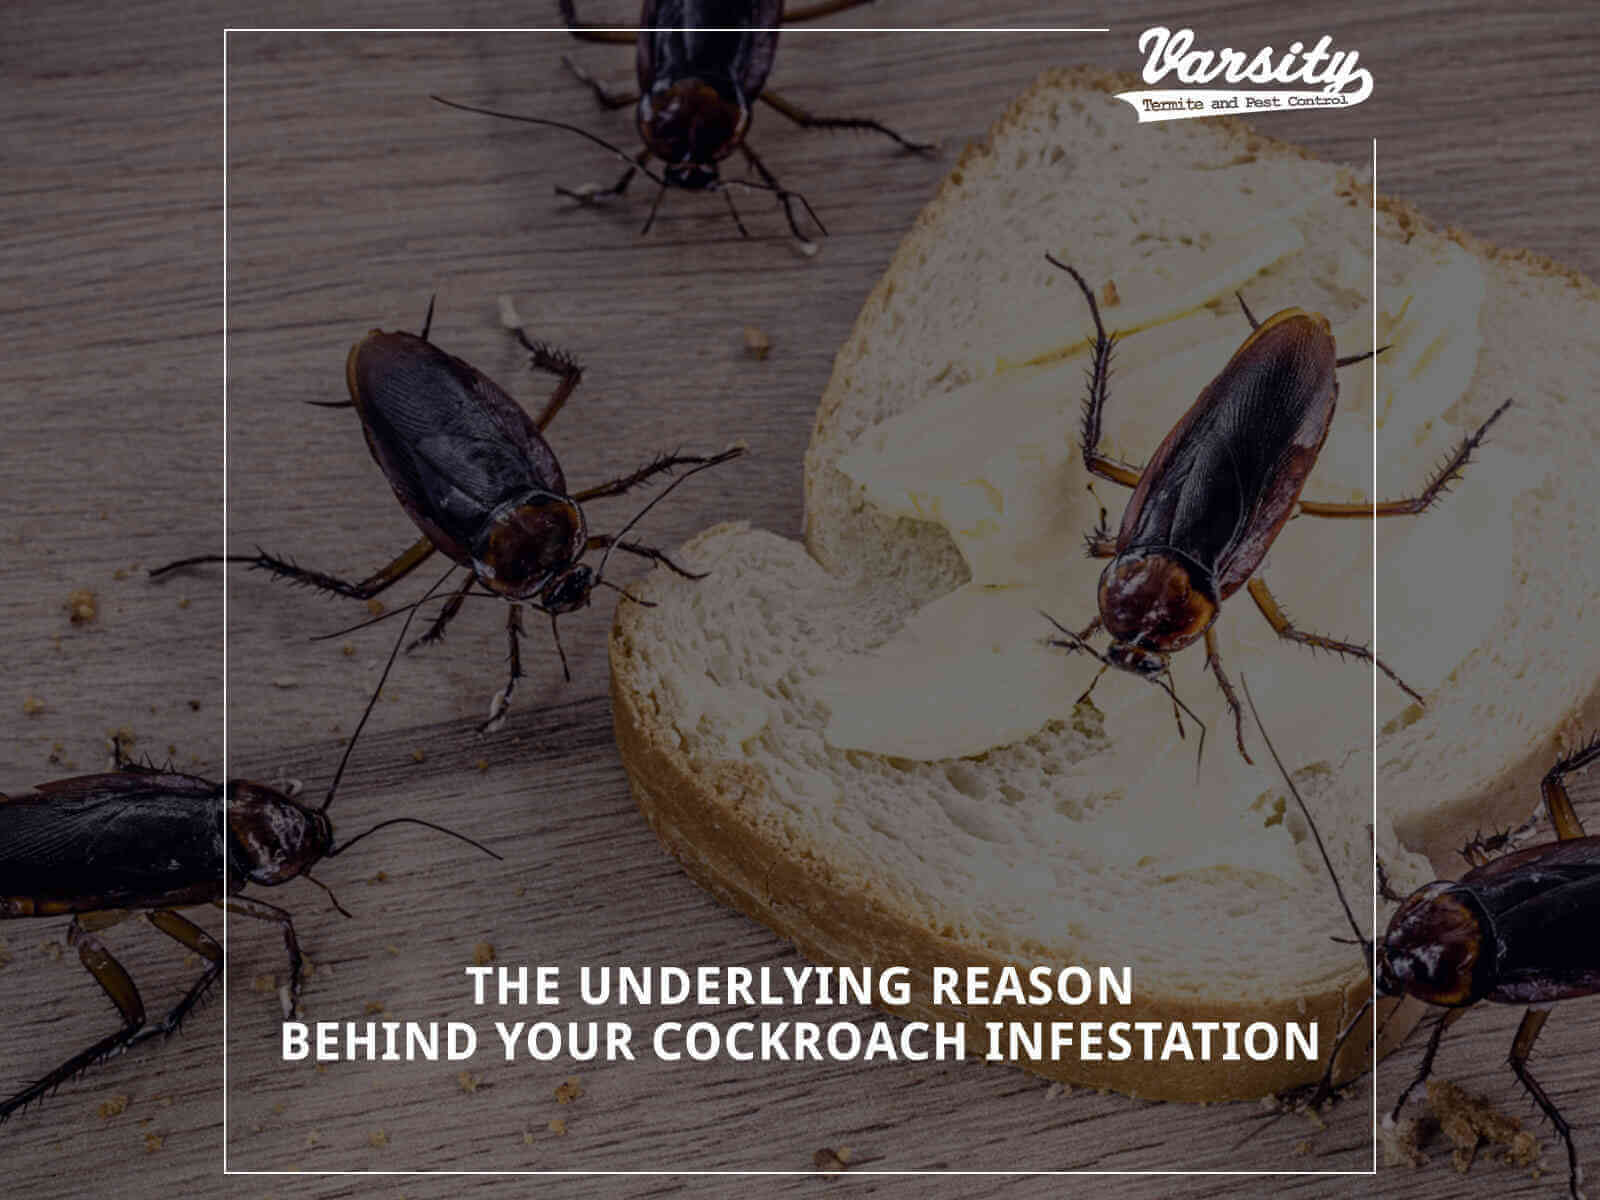 The Underlying Reason Behind Your Cockroach Infestation